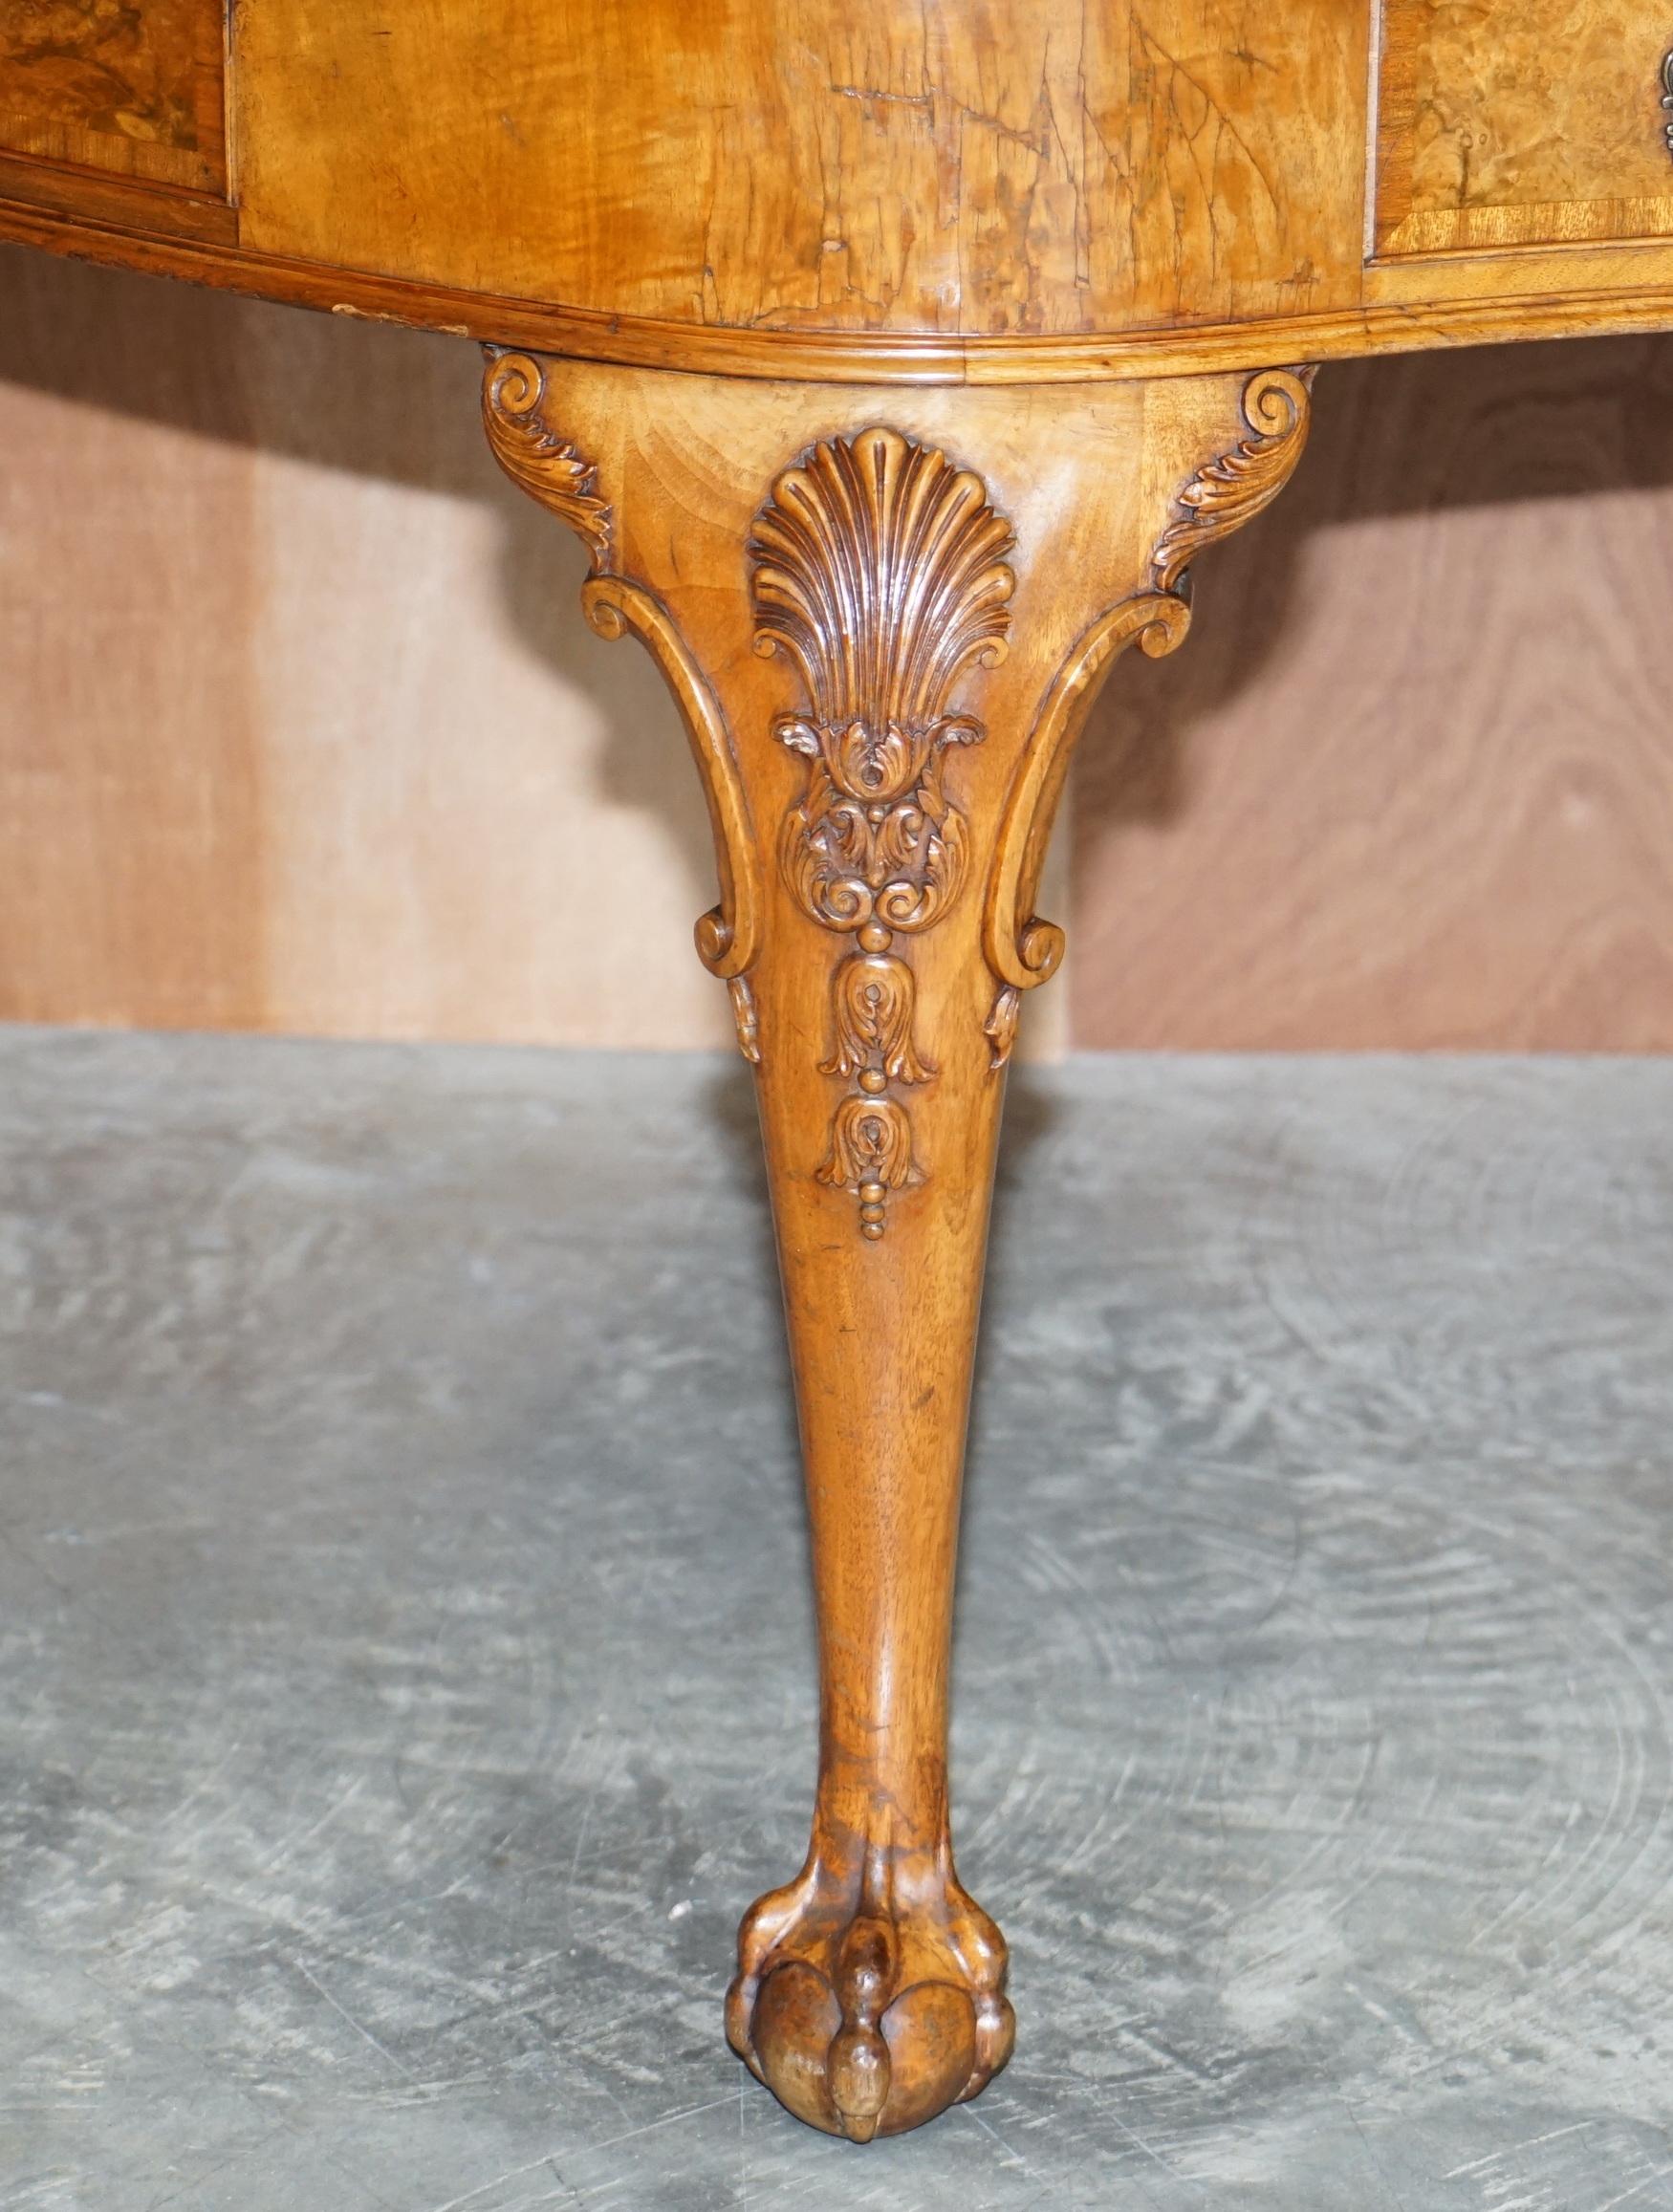 Hand-Crafted Burr Walnut Antique Victorian Lion Claw & Ball Feet Kidney Library Table Desk